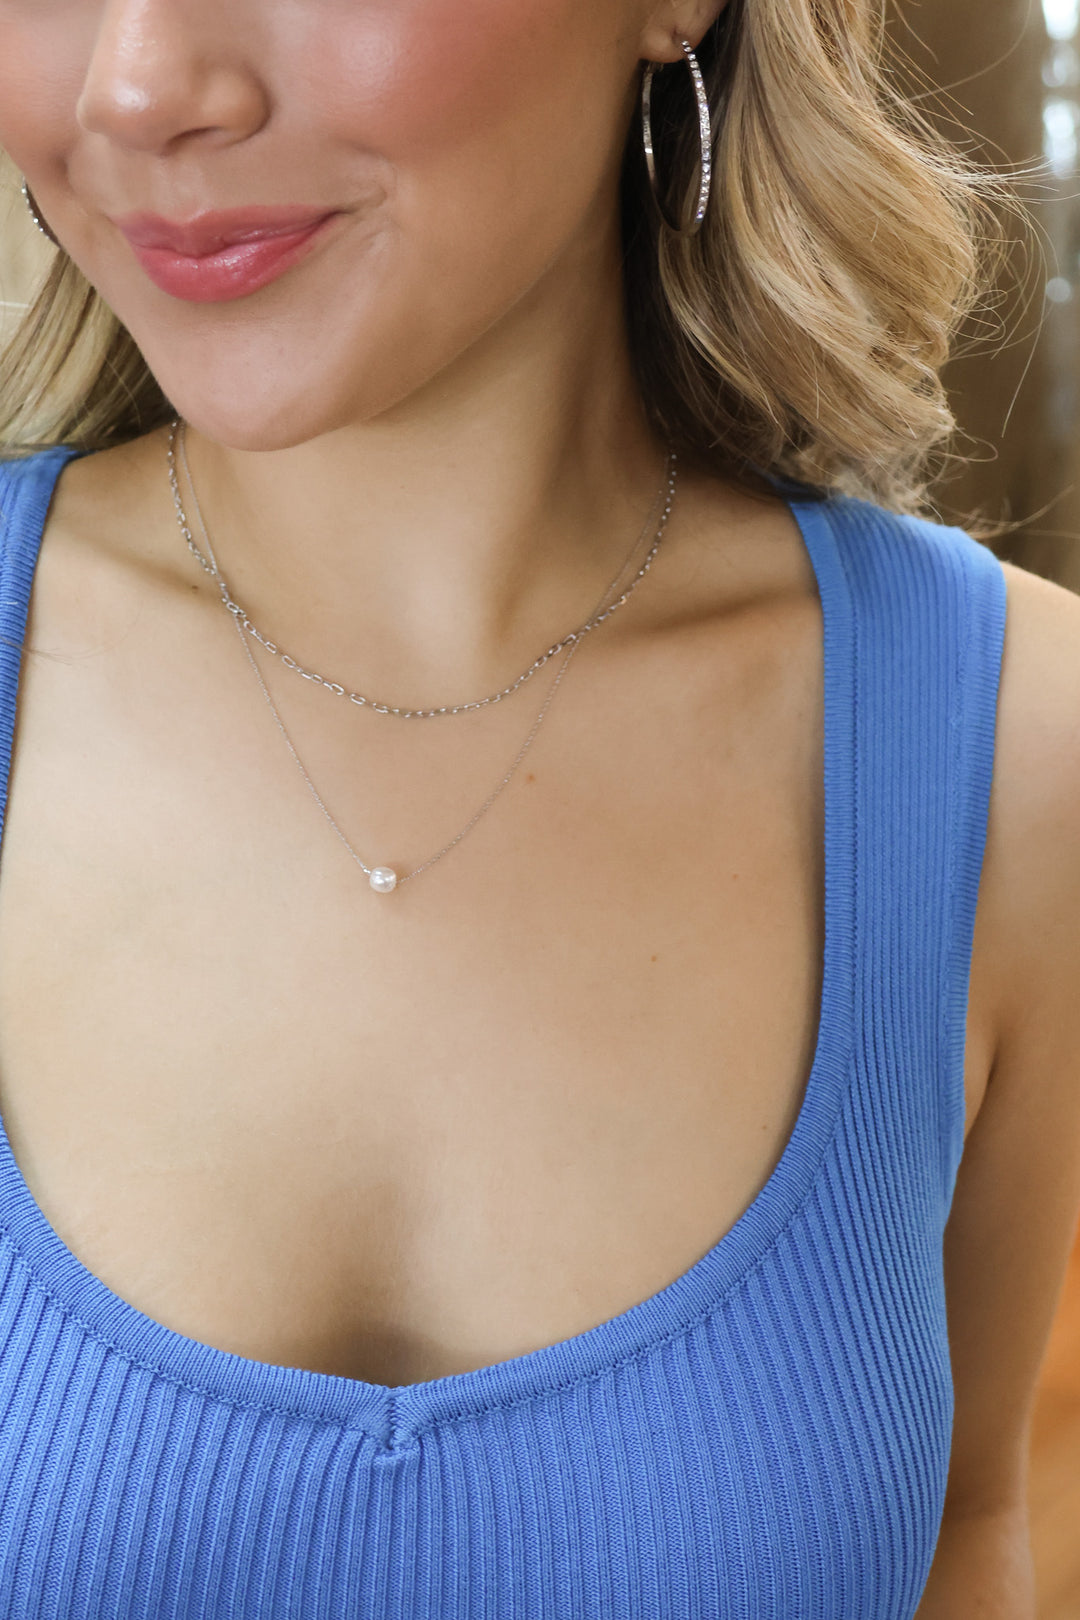 Lana Pearl Necklace - ShopSpoiled